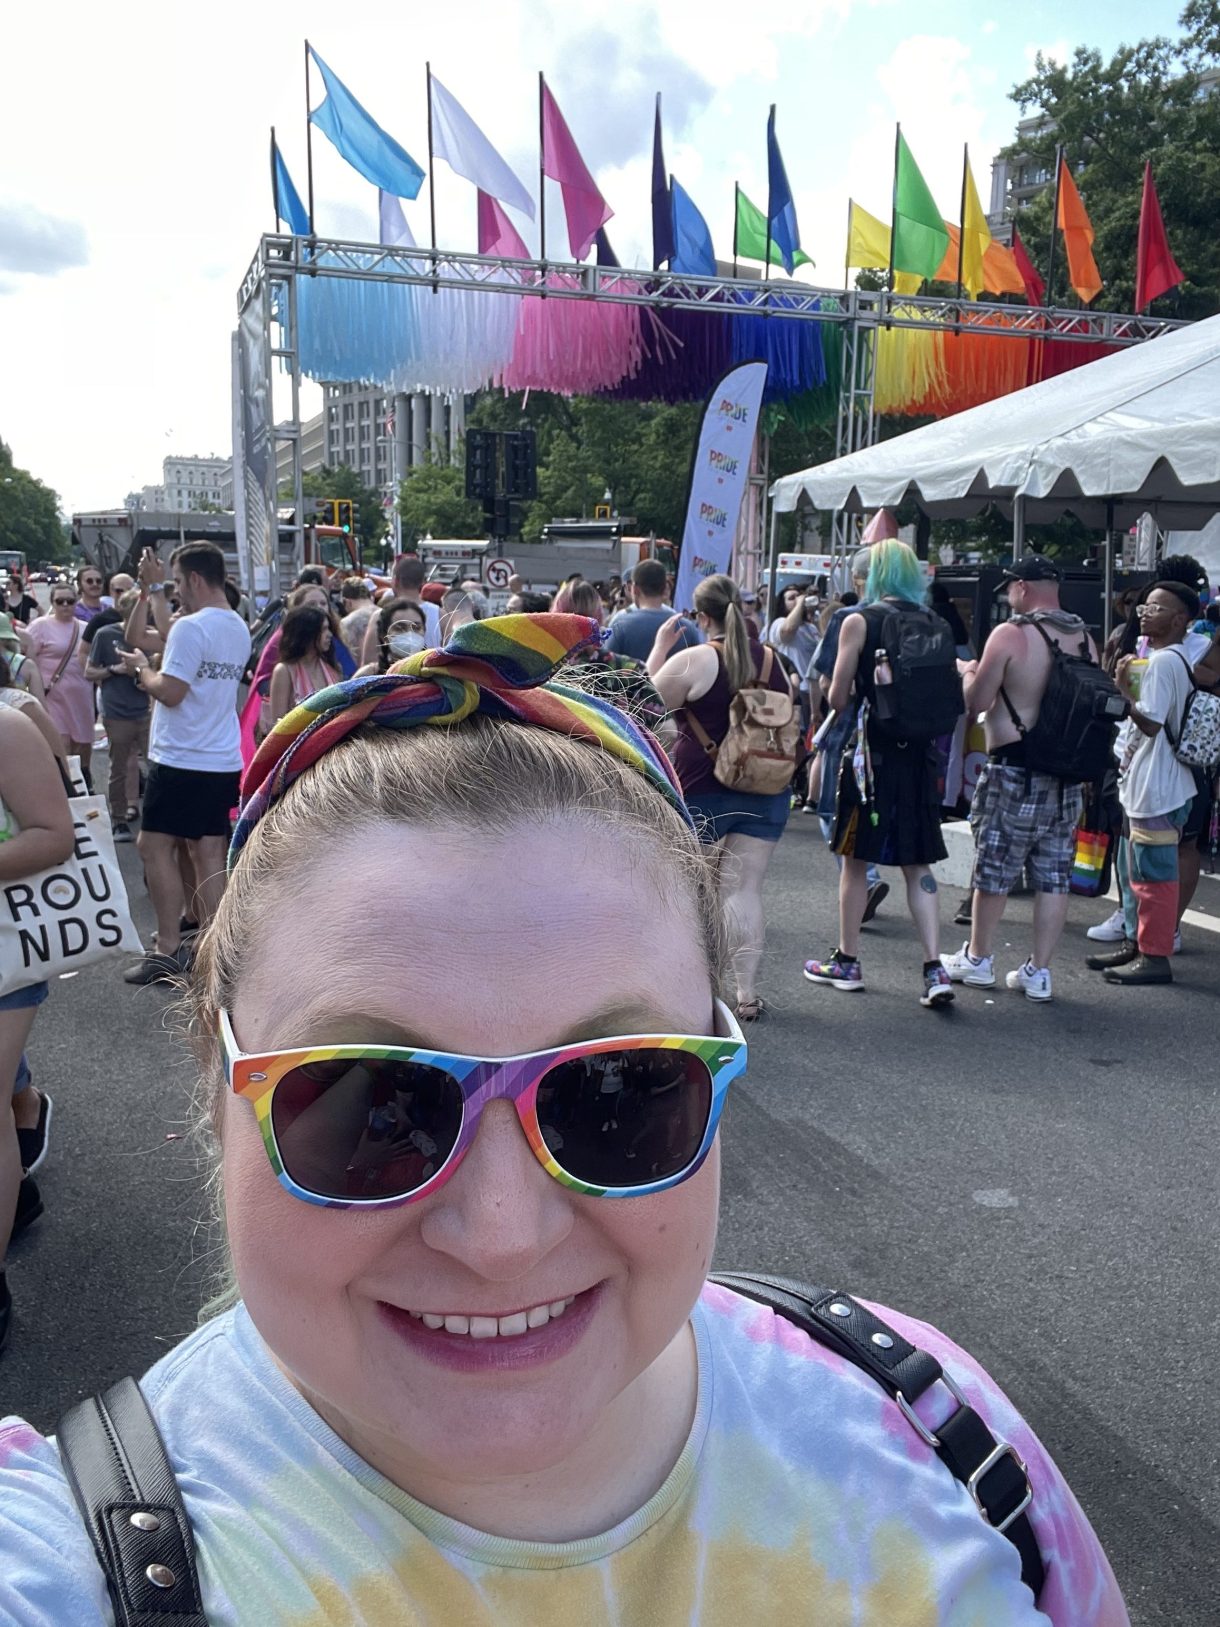 Katie is at a Pride event! Katie is a white woman wearing rainbow sunglasses and a rainbow headband tied at the top of her blonde hair. You can vaguely see people marching in the background.